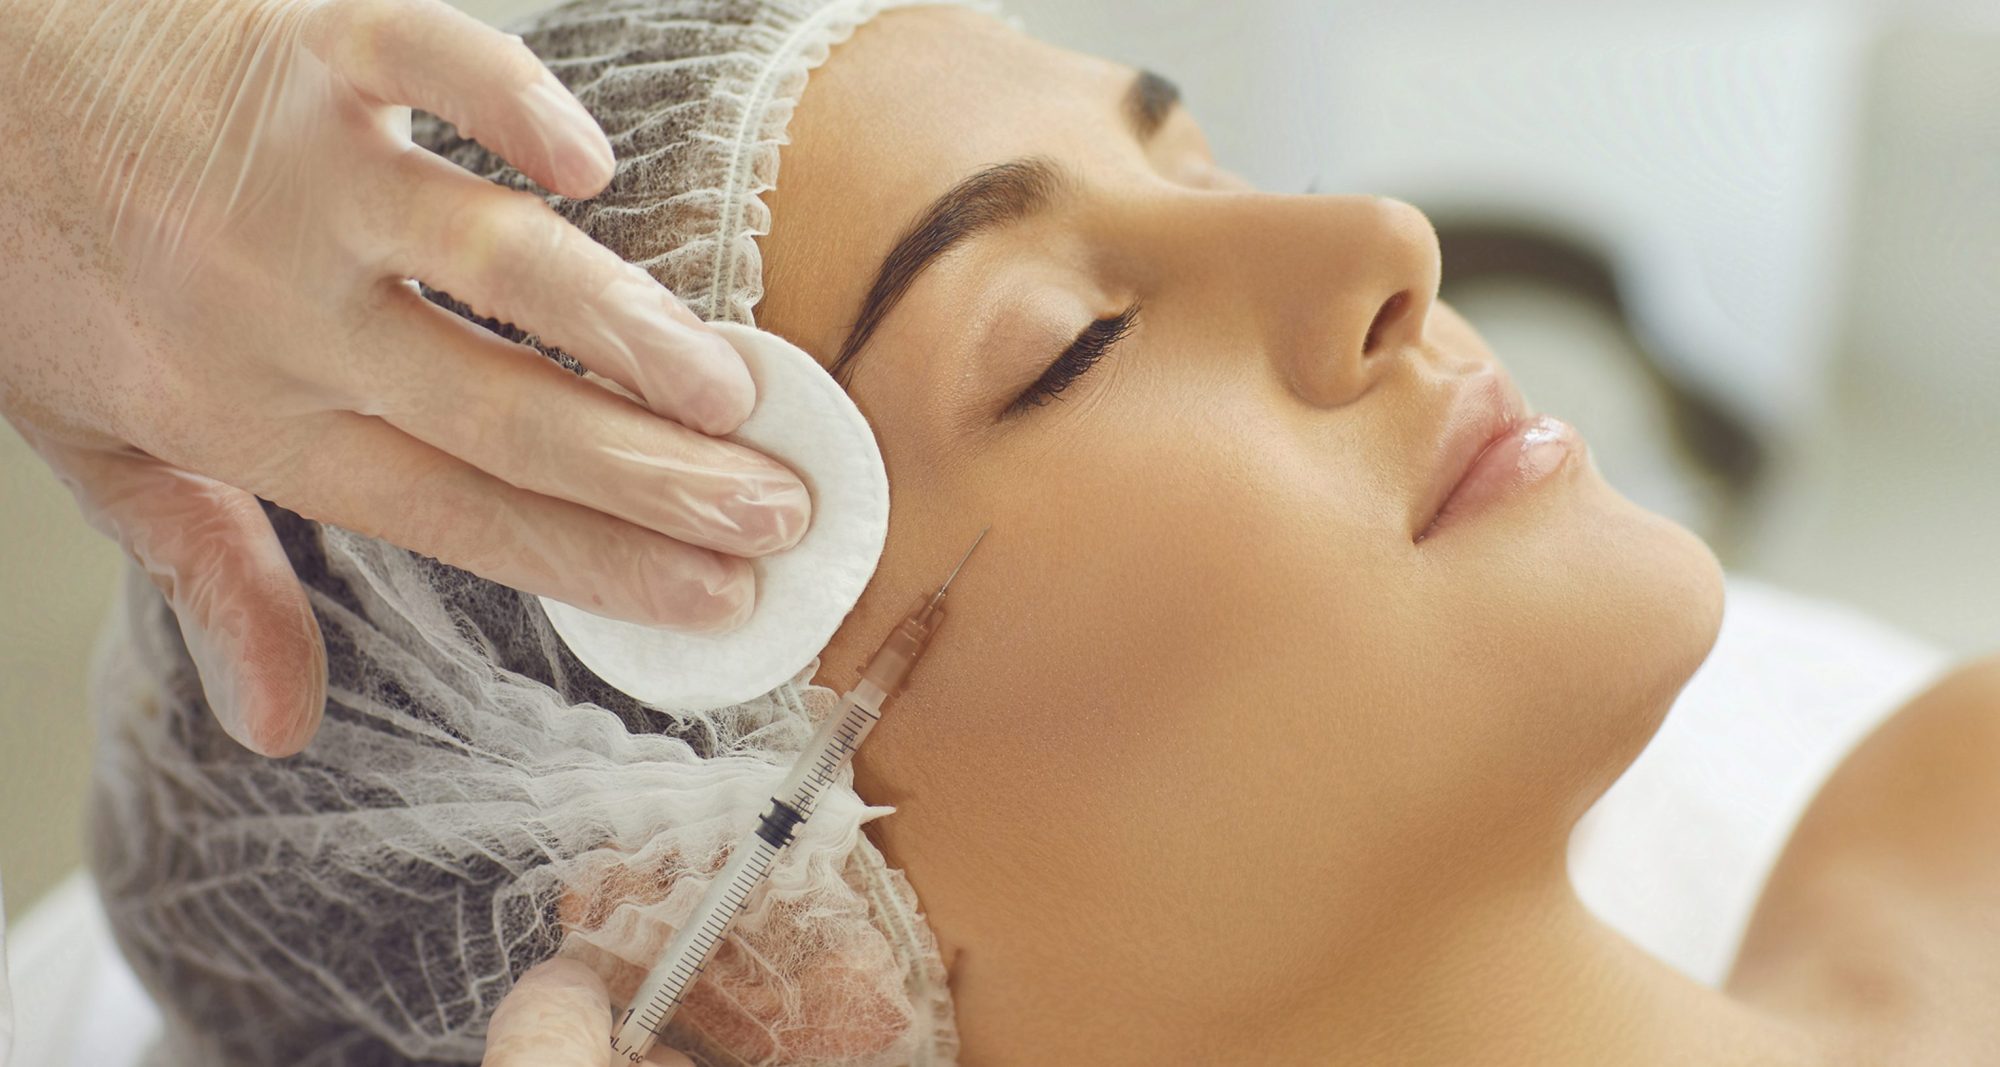 Cosmetologist wiping skin with cotton pads during facial beauty botox injection for young womans cheek in beauty salon, side view. Facial treatment and beauty injection concept